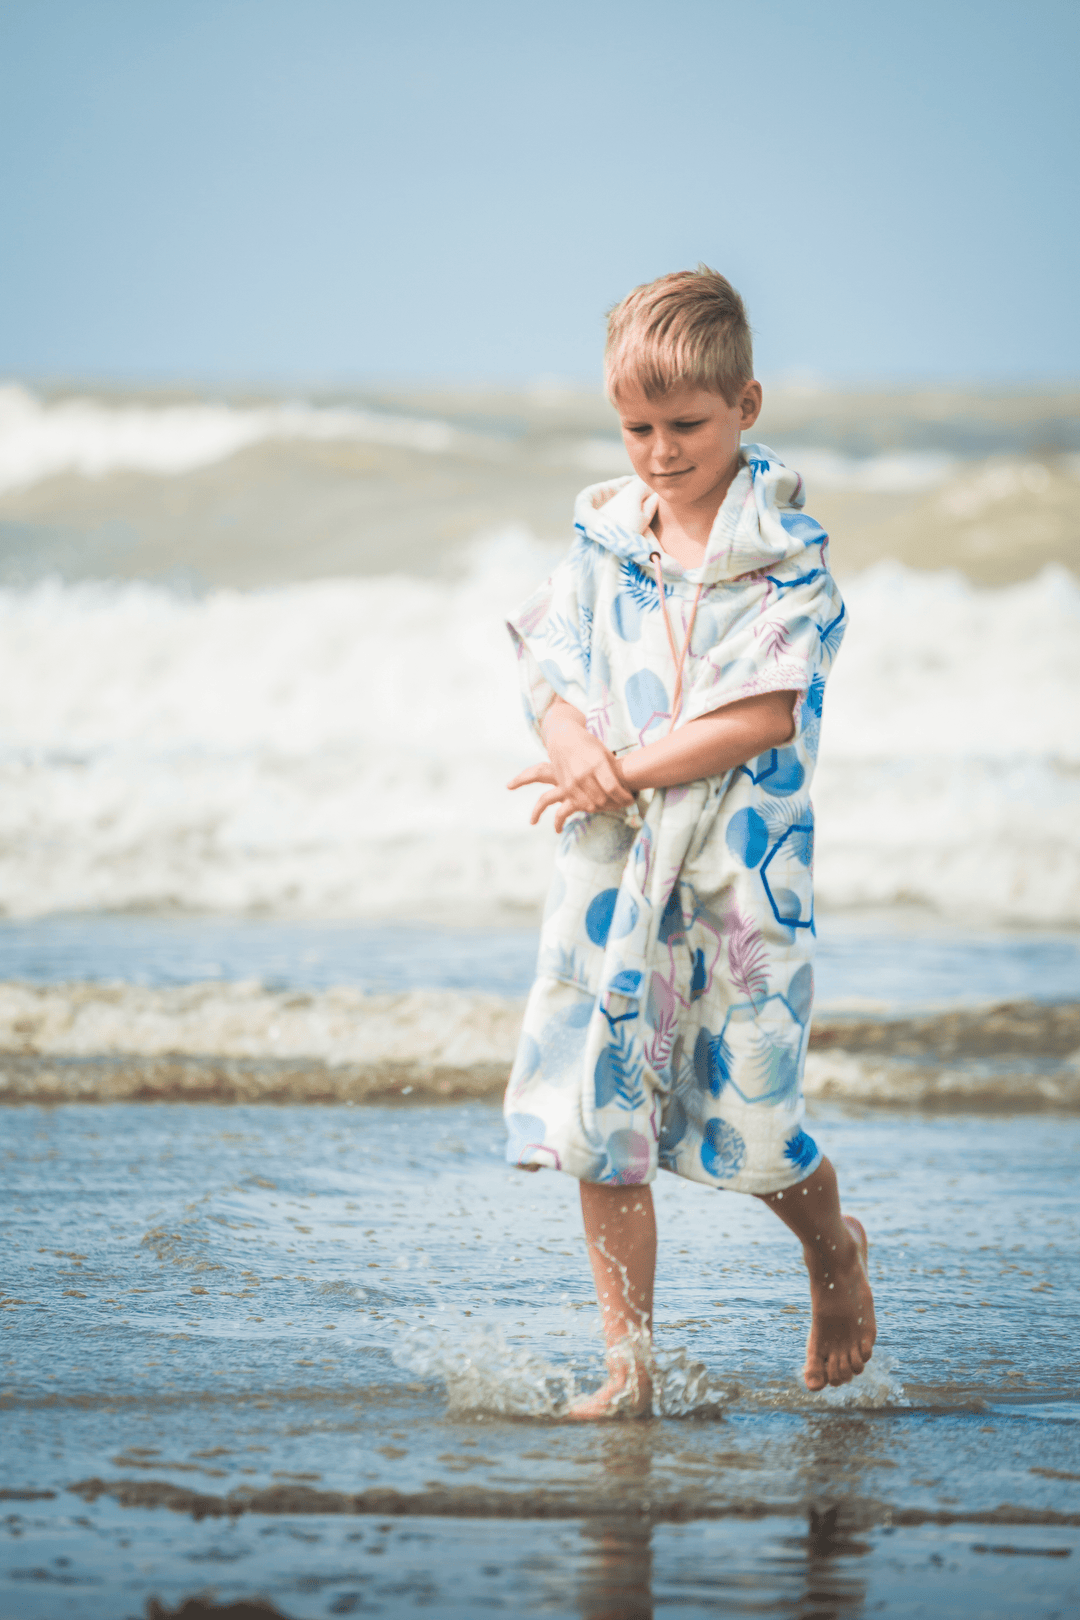 Our teen size has the same design as the adult, just a bit smaller. A changing towel is a must-have for teenagers to get warm and hang around after a day on the beach. Our spacious surf poncho allows them to change clothes in private. The various shapes and colors from our NEON design will illuminate their beach look.